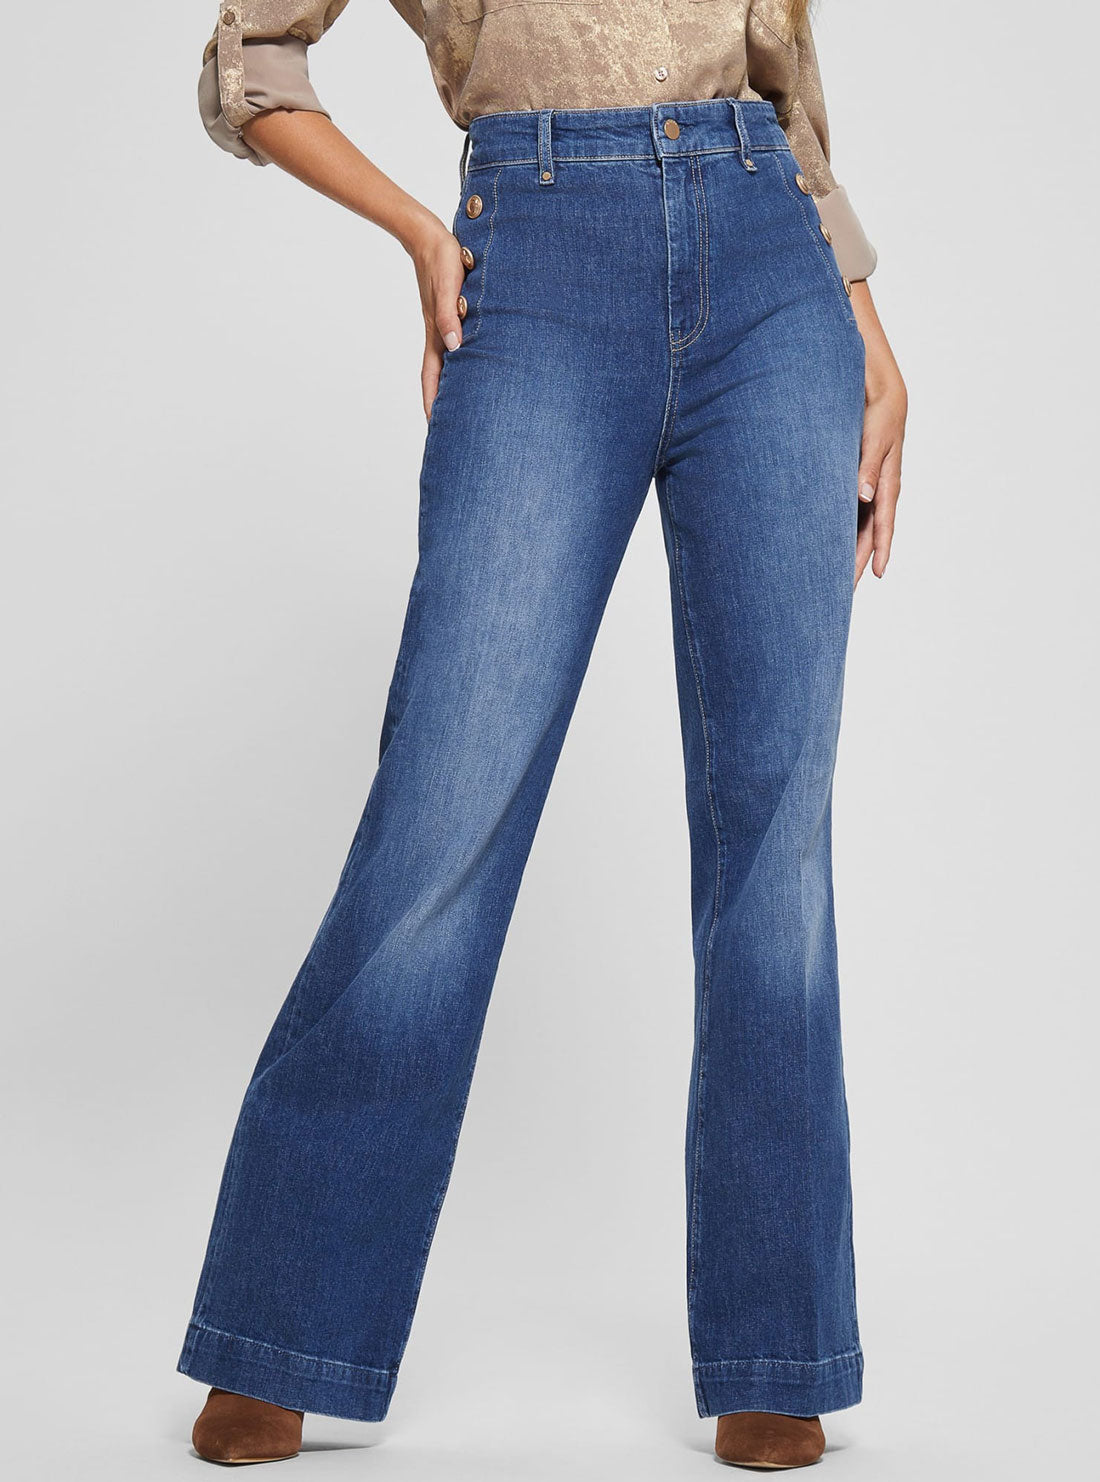 Blue Faye Flare Denim Jeans | GUESS Women's Apparel | front view